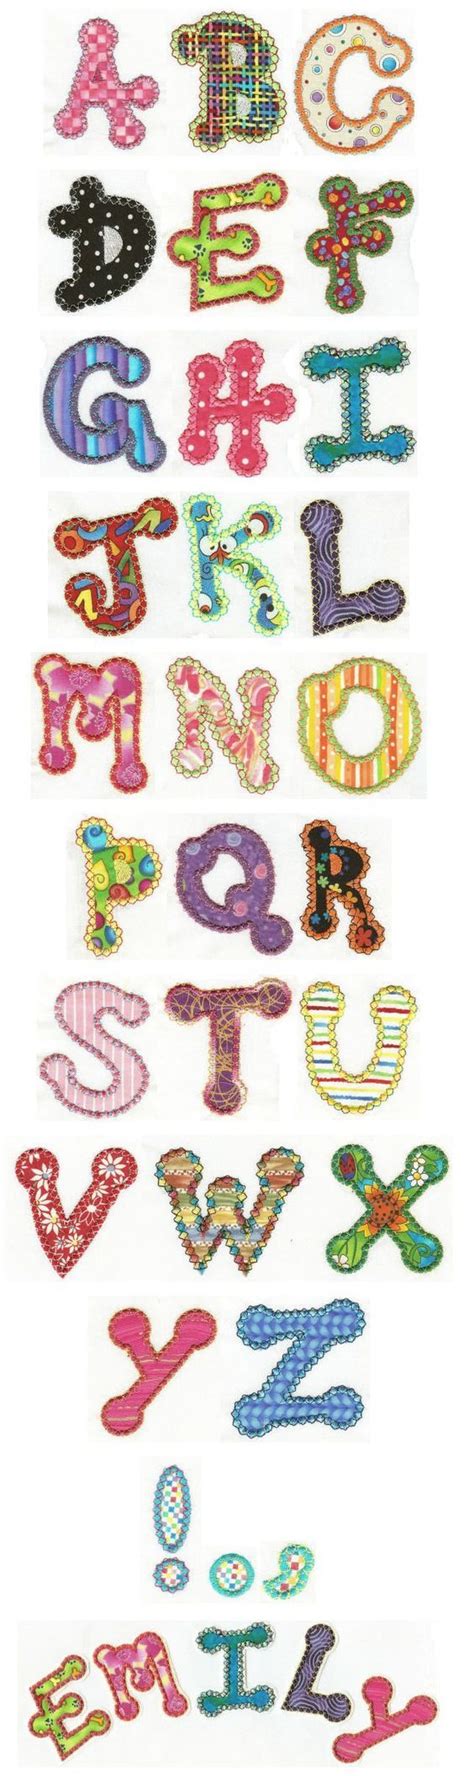 Free Applique Alphabet Patterns Embroidery Free Machine Embroidery